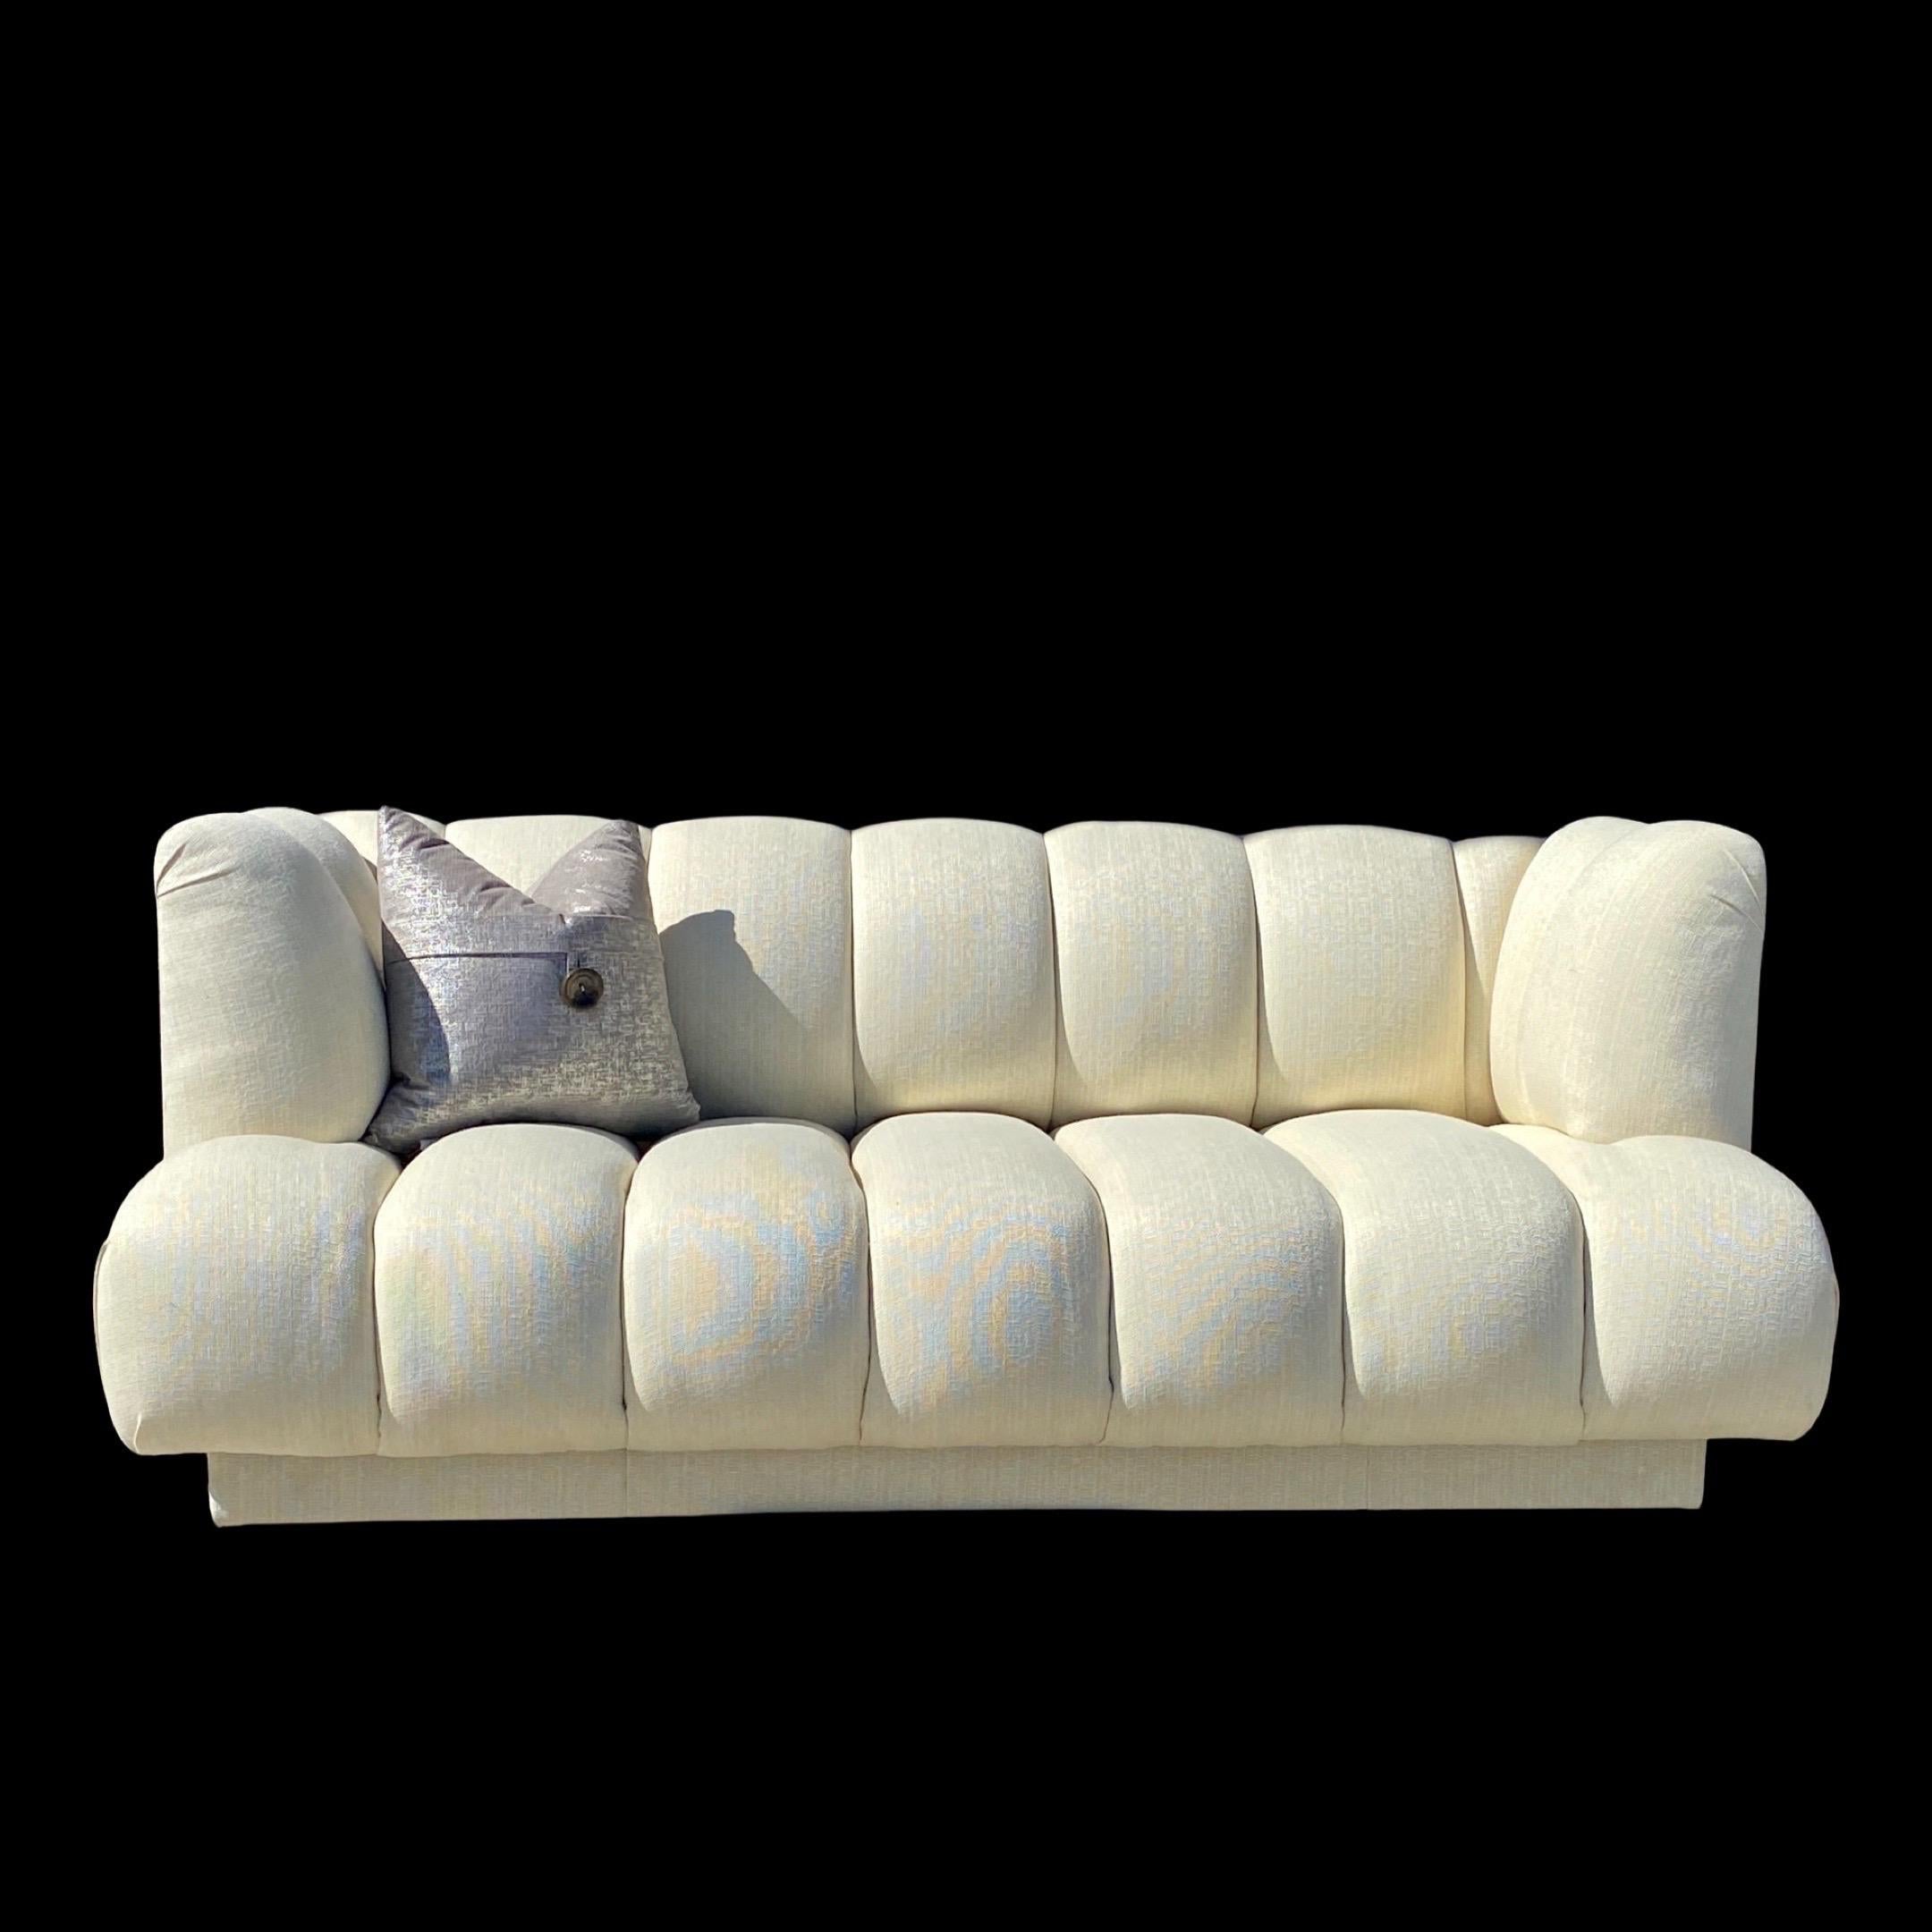 Steve Chase Iconic Channel Sofa From Celebrity Estate in New Creme Upholstery  For Sale 13